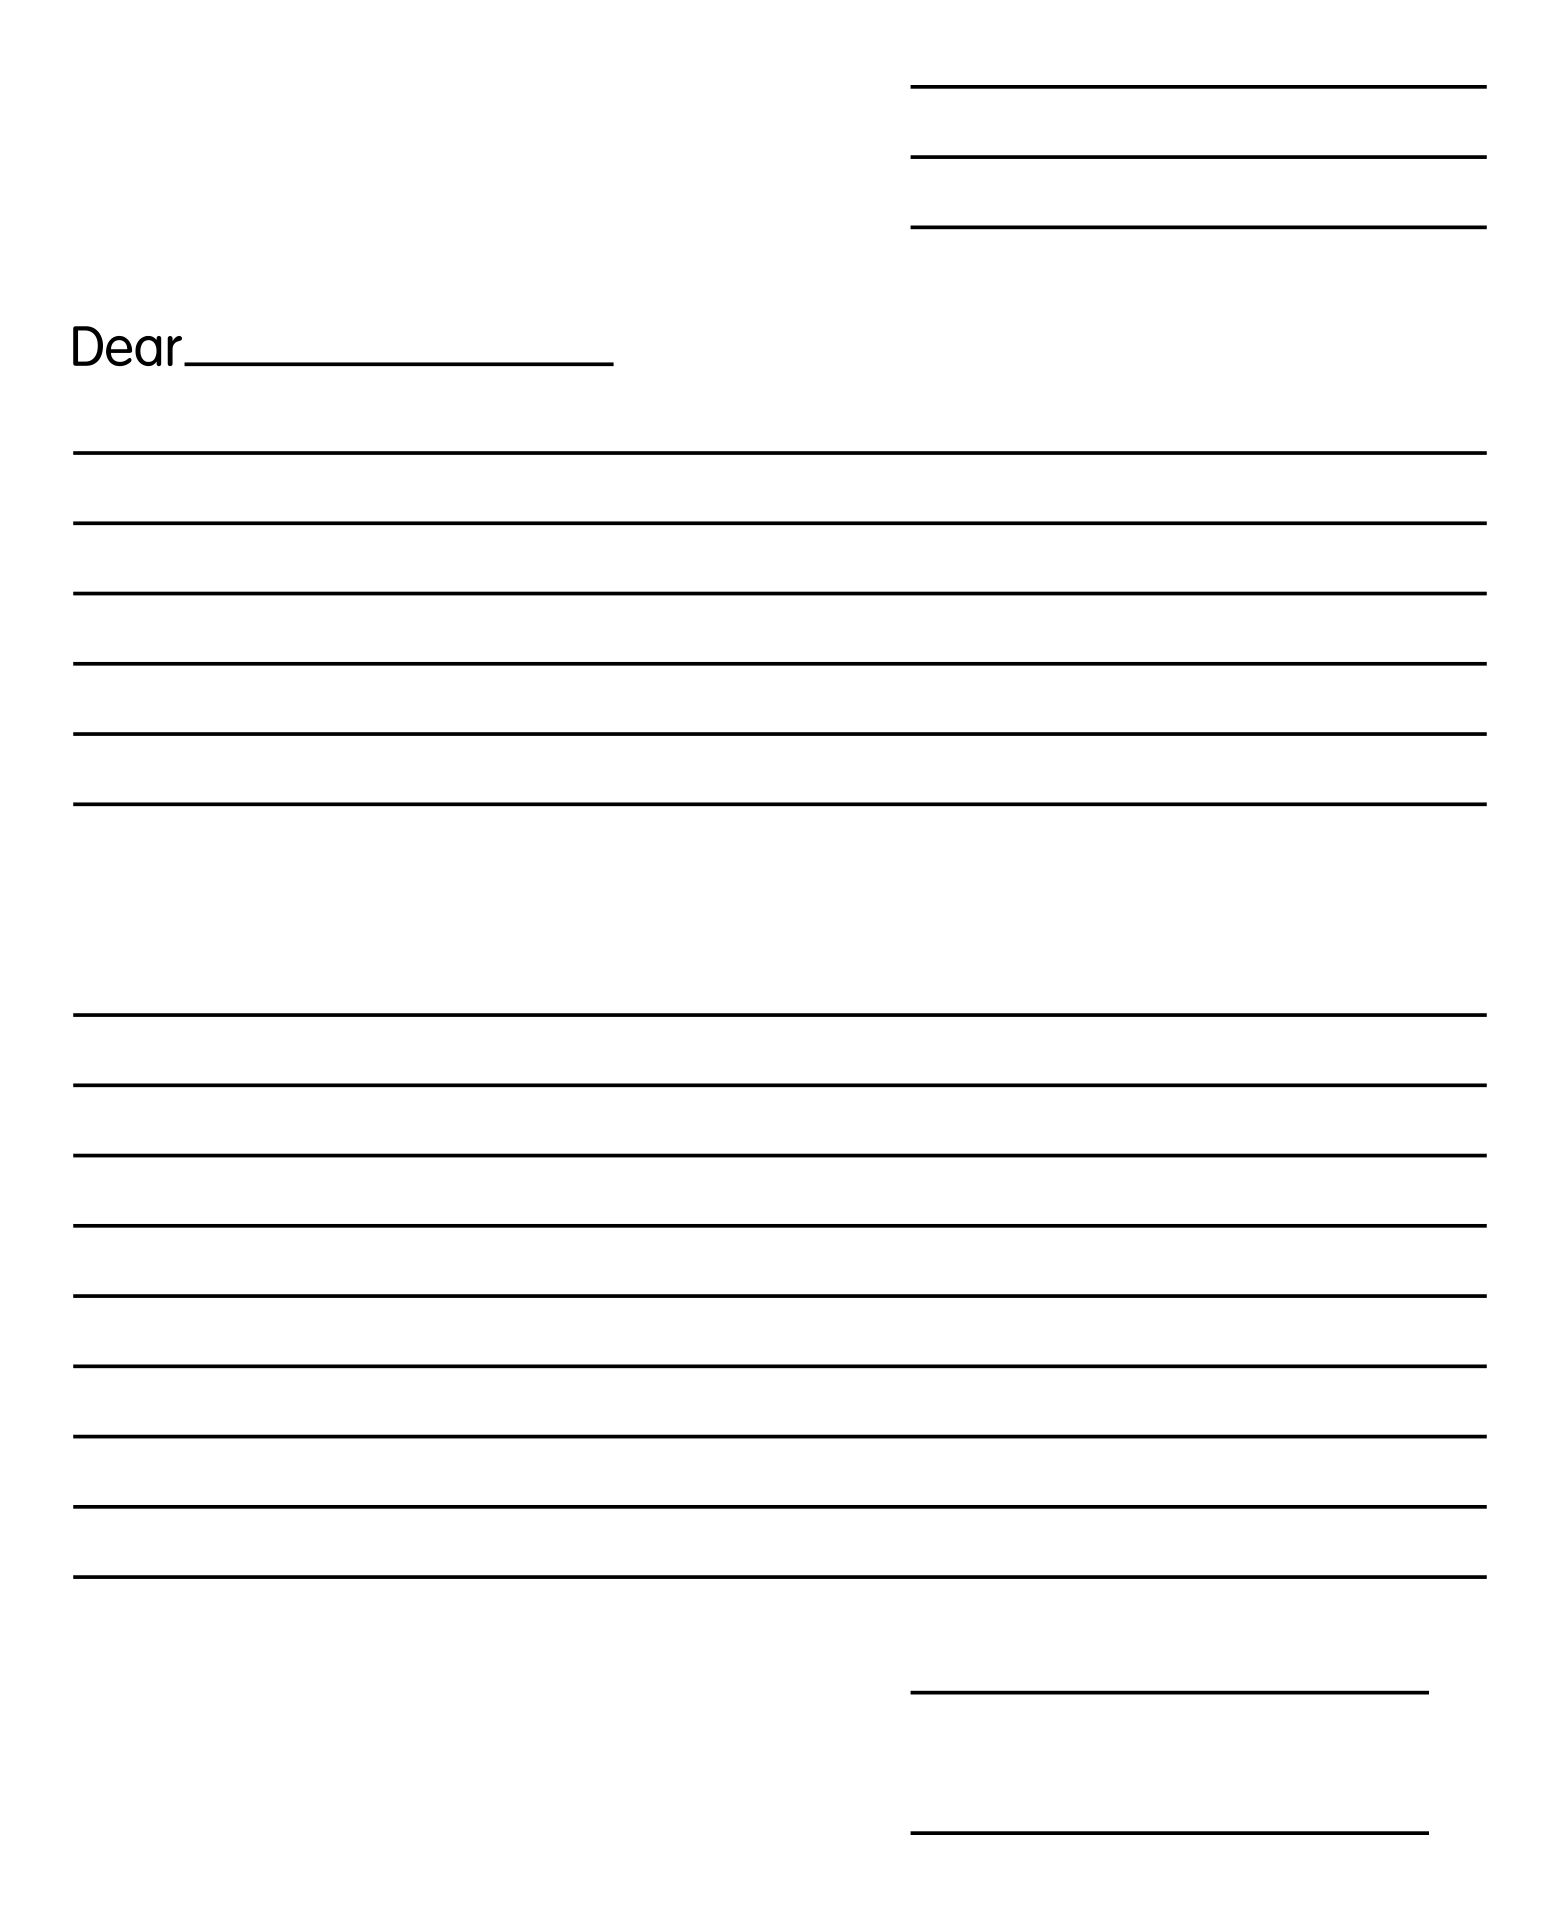 Free Fillable Letter Templates